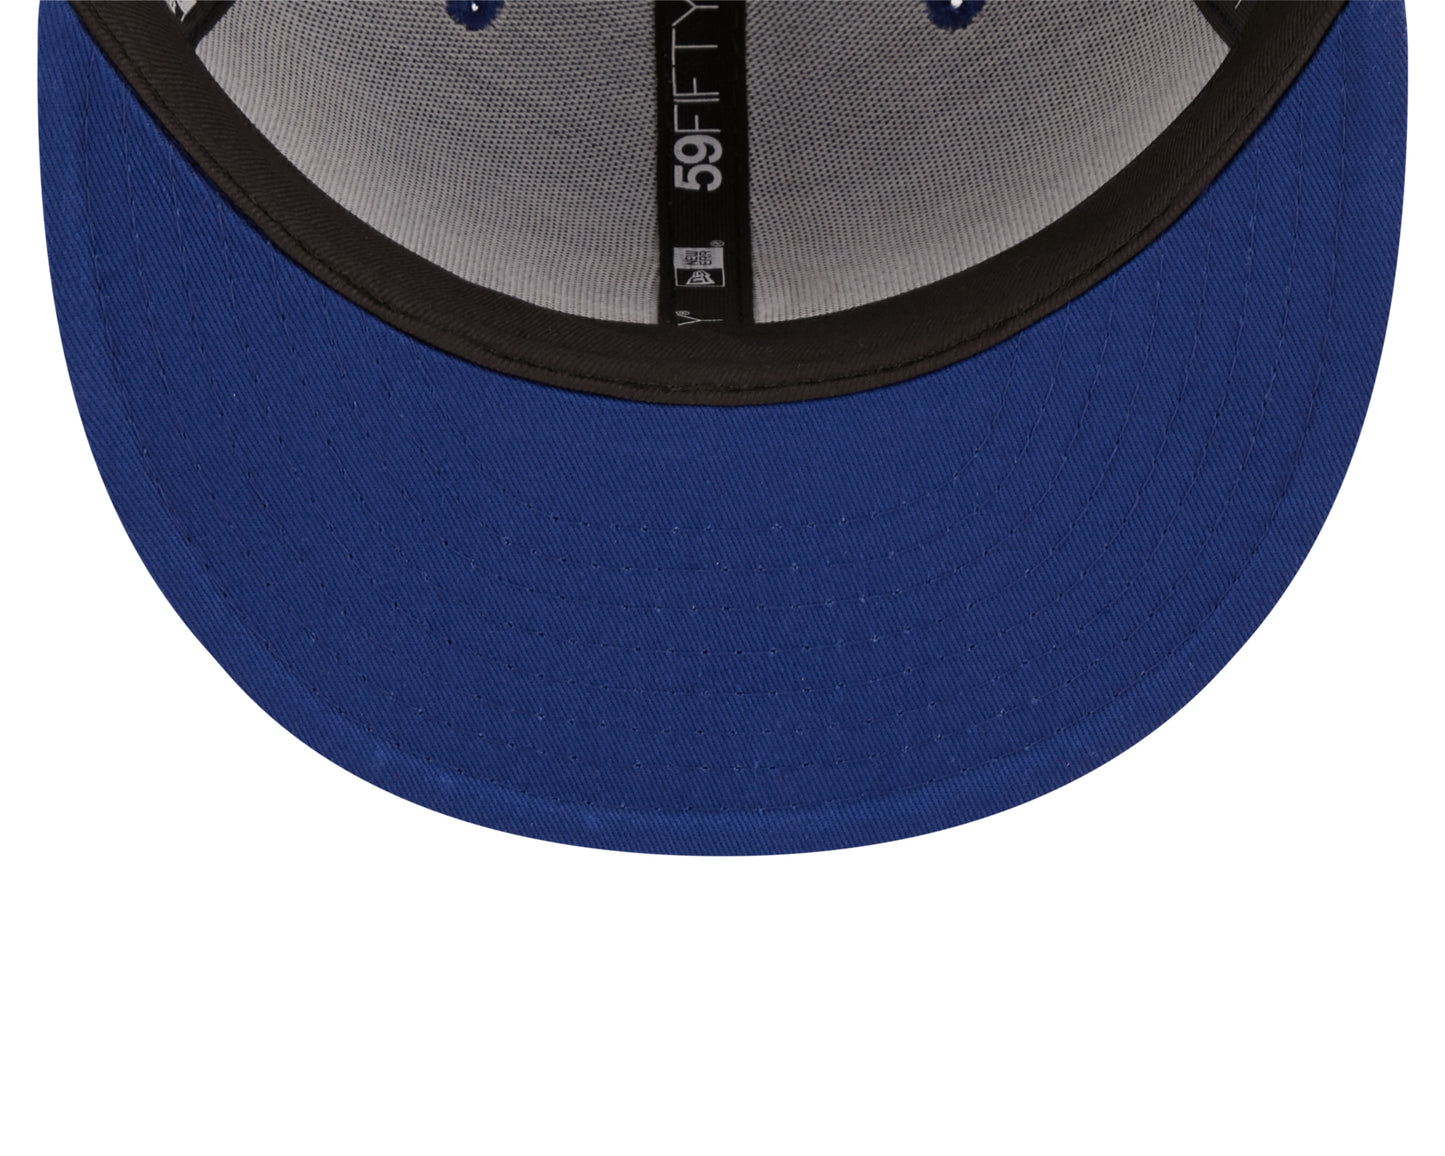 Chicago Cubs New Era City Side Patch 59fifty Fitted Hat